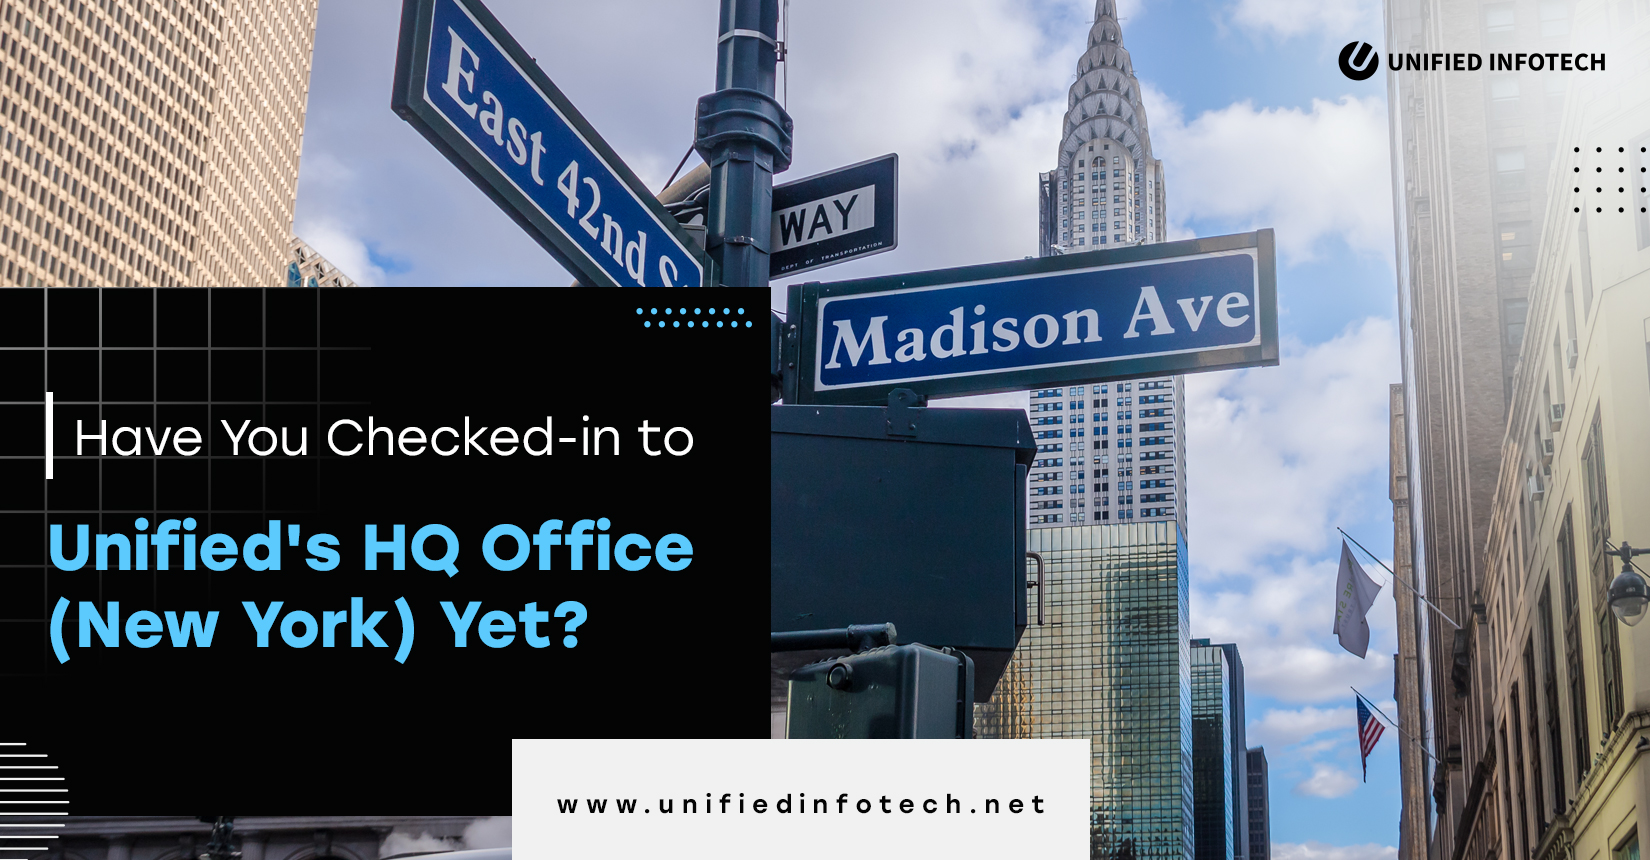 Have You Checked-in to Unified’s HQ Office (NYC) Yet?